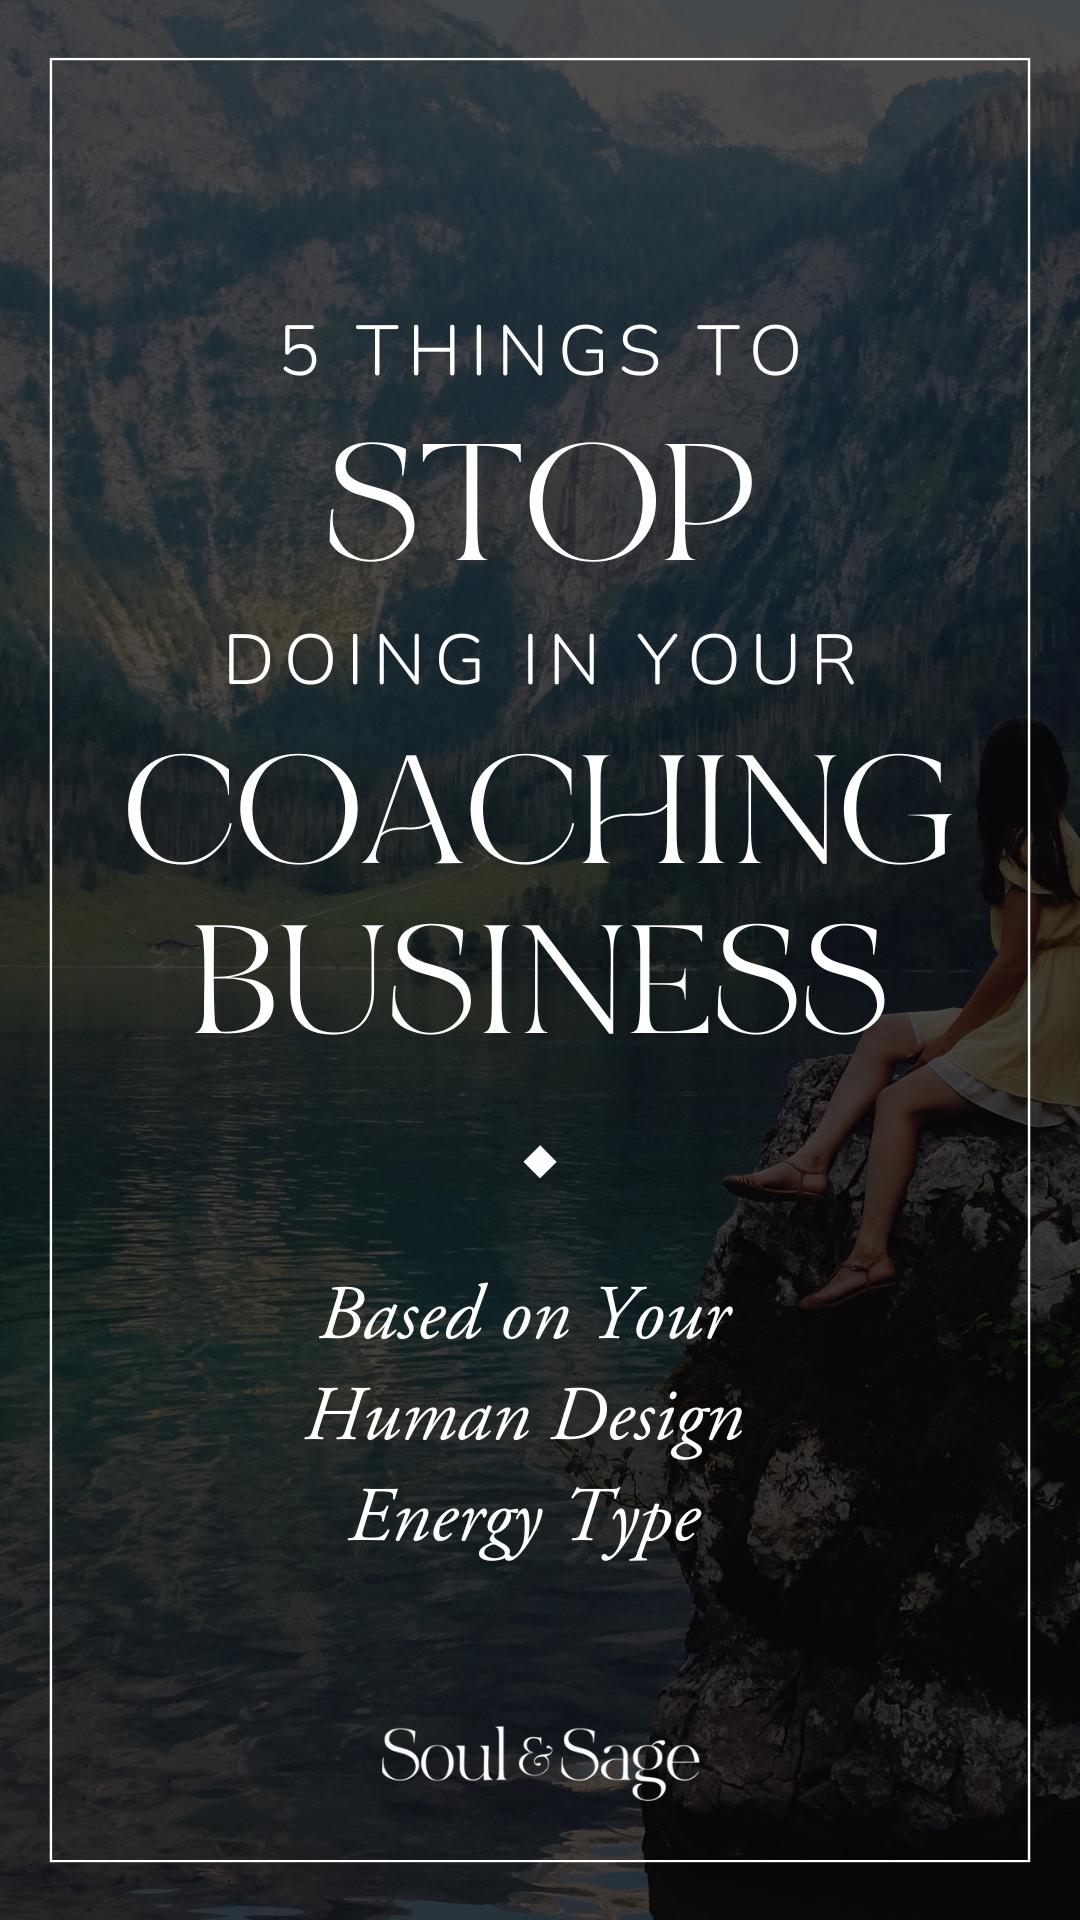 5 Things to STOP Doing in Your Coaching Business Based on Your Human Design Energy Type - Soul & Sage